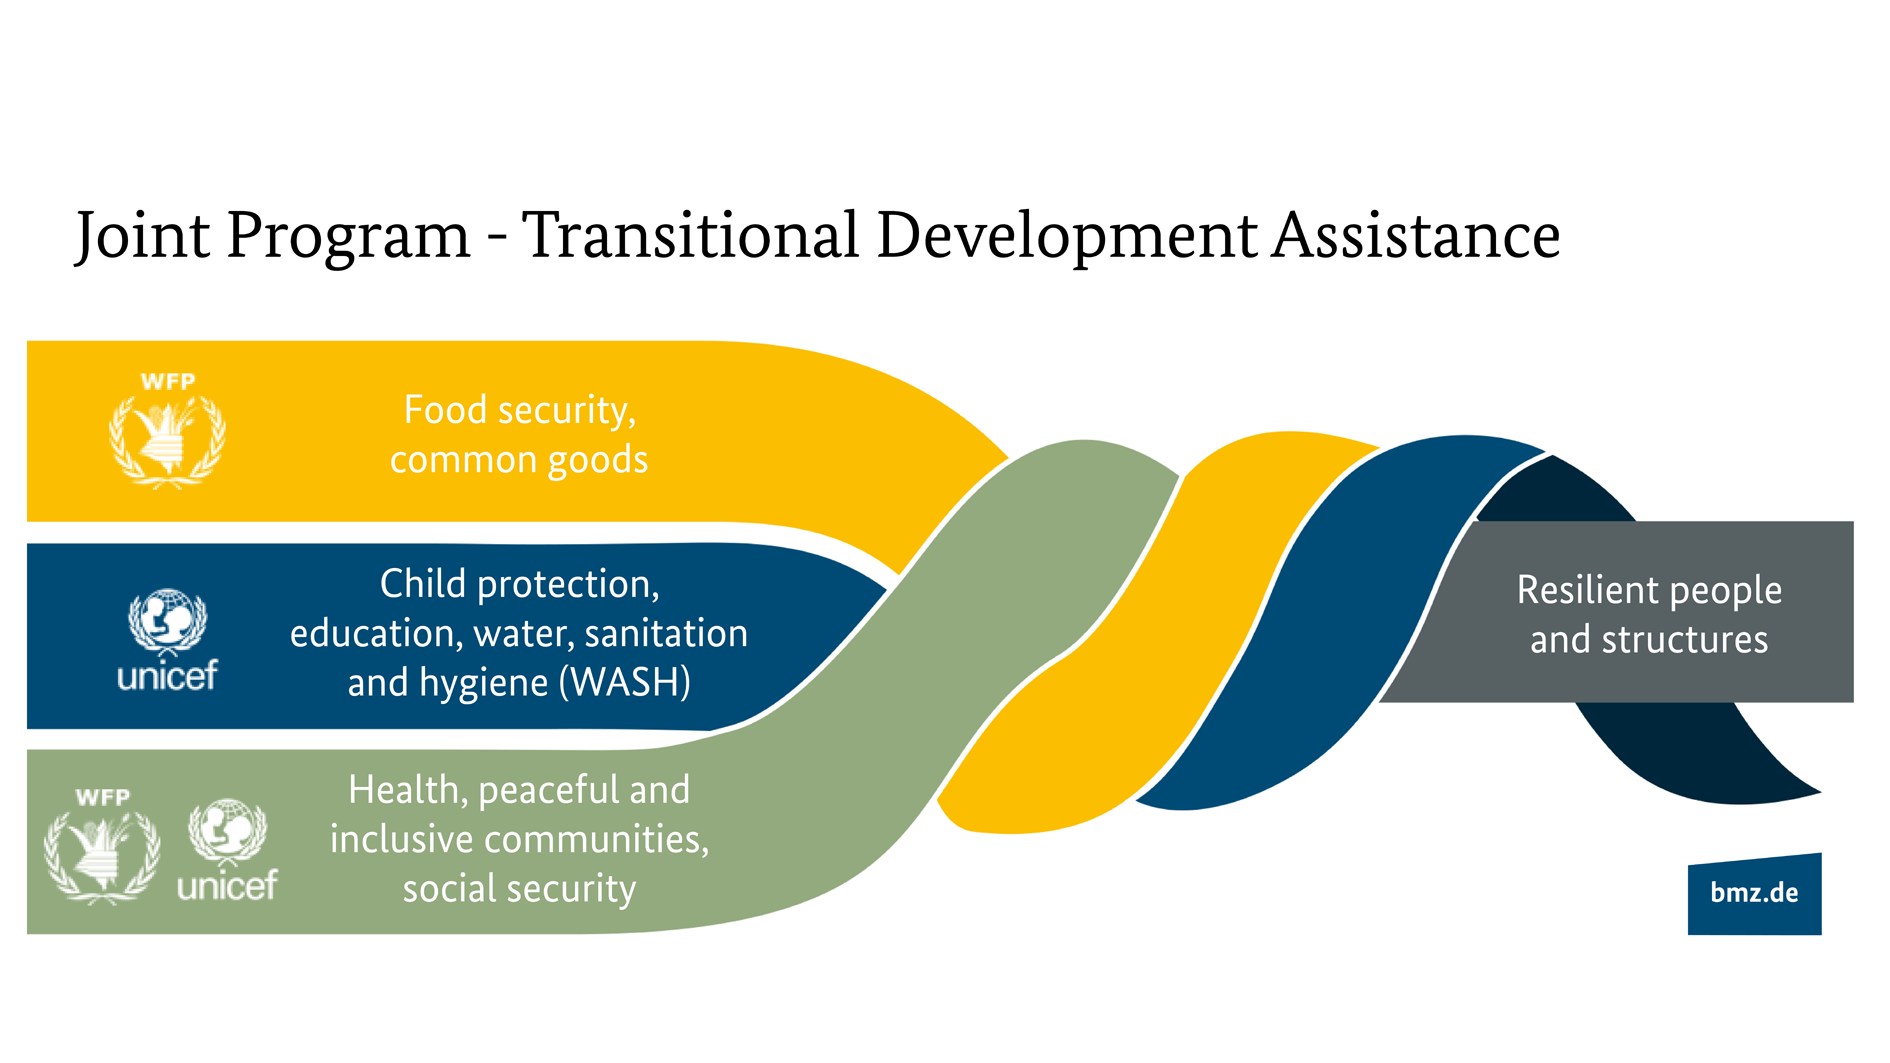 Graphic: Example of a joint programme of the World Food Programme, UNICEF and BMZ in the context of transitional development assistance.